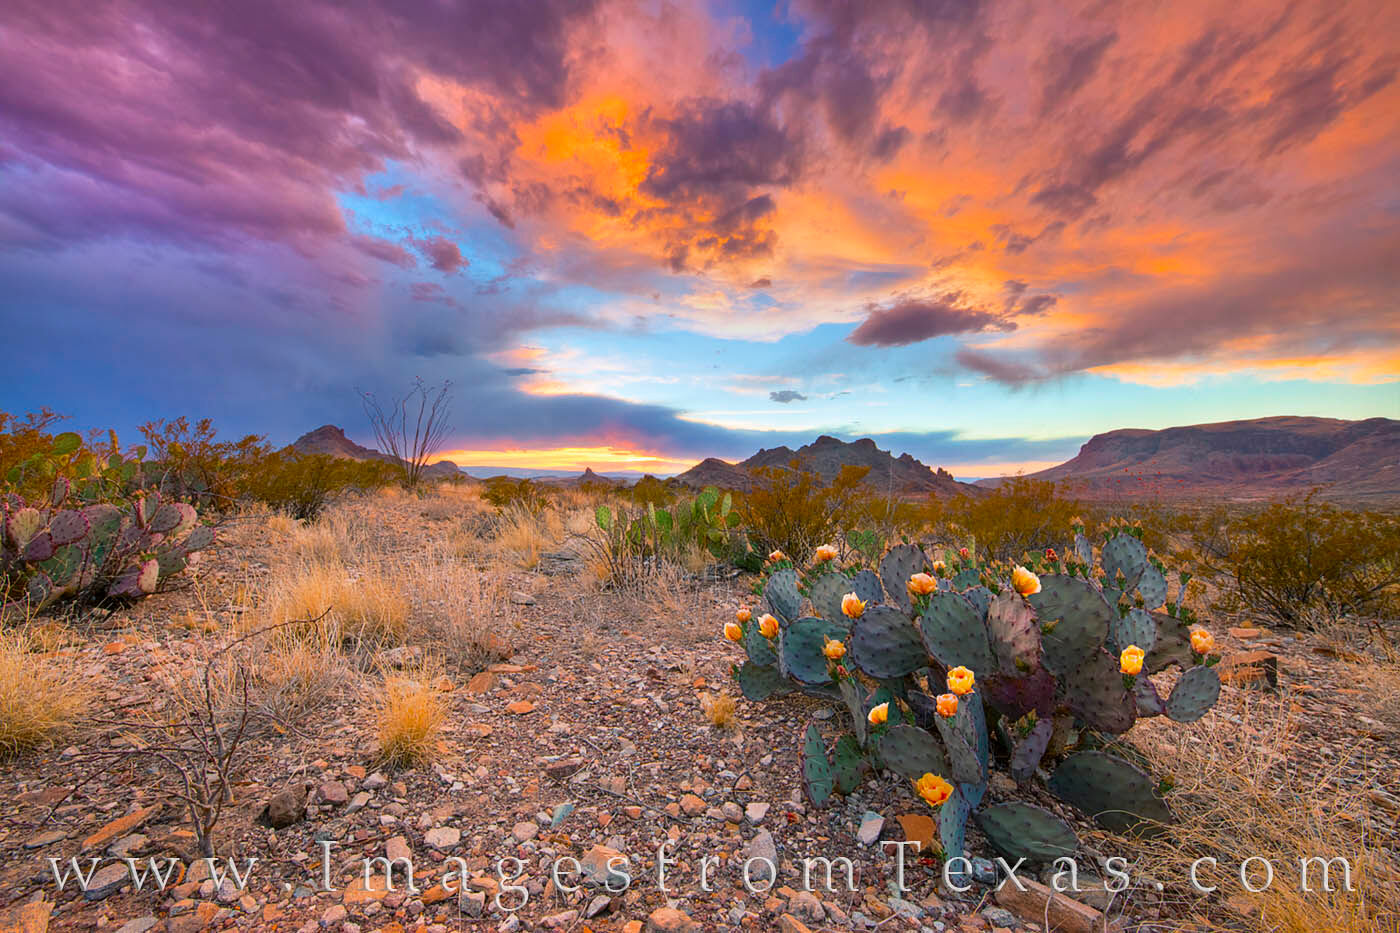 Storm clouds gave way to amazing light in the evening sky on this evening in Big Bend National Park. The prickly pear cacti were...